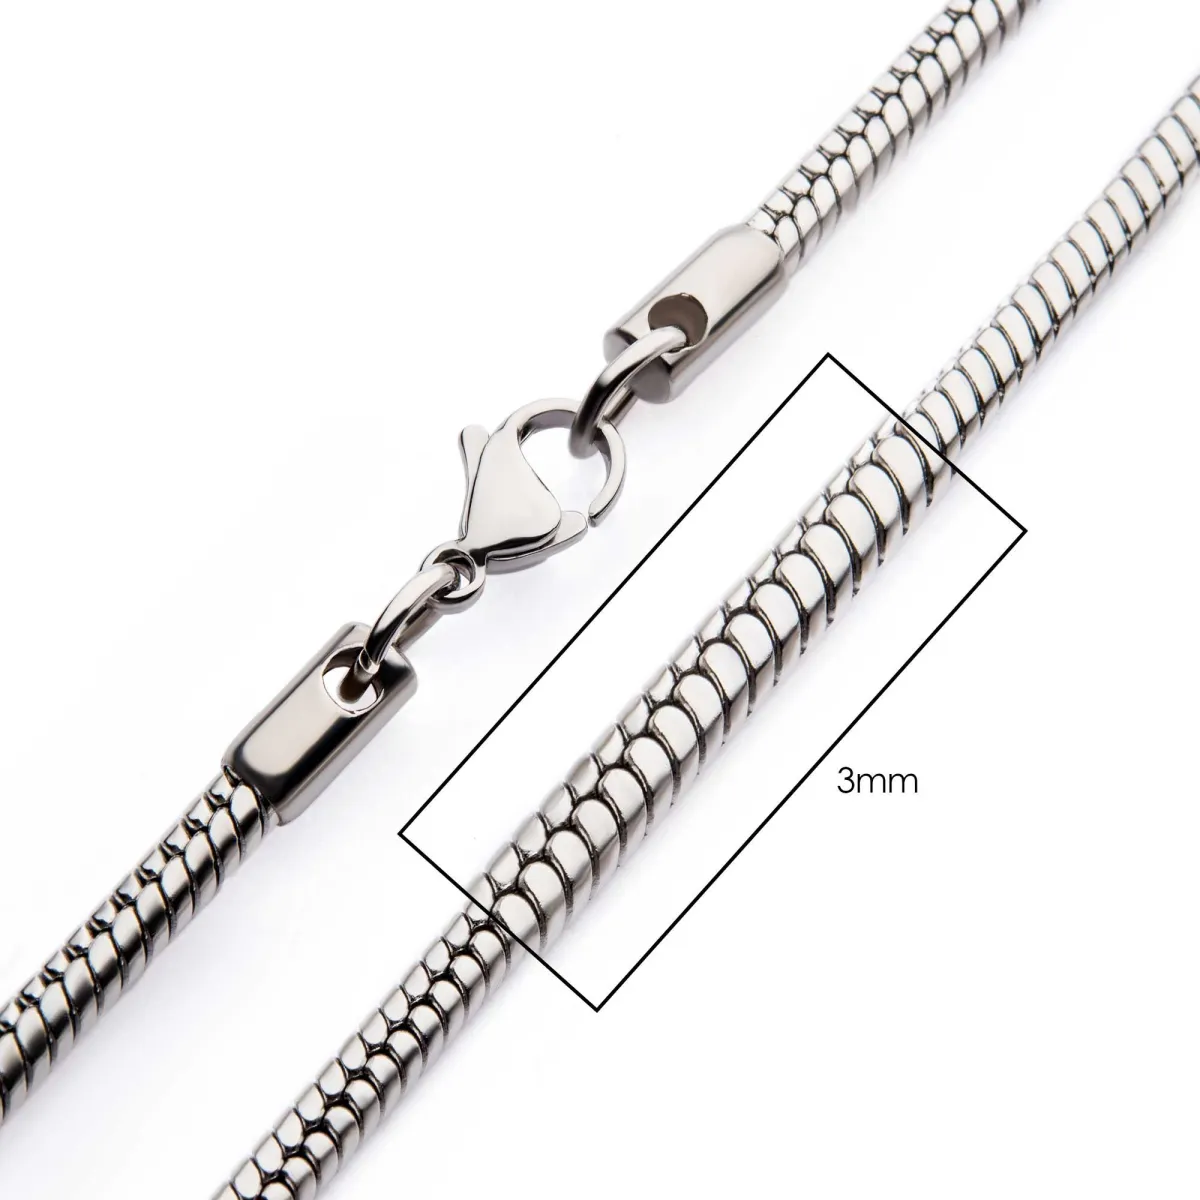 Stainless Steel Chains. In Which Applications? - Blog Inox mare En